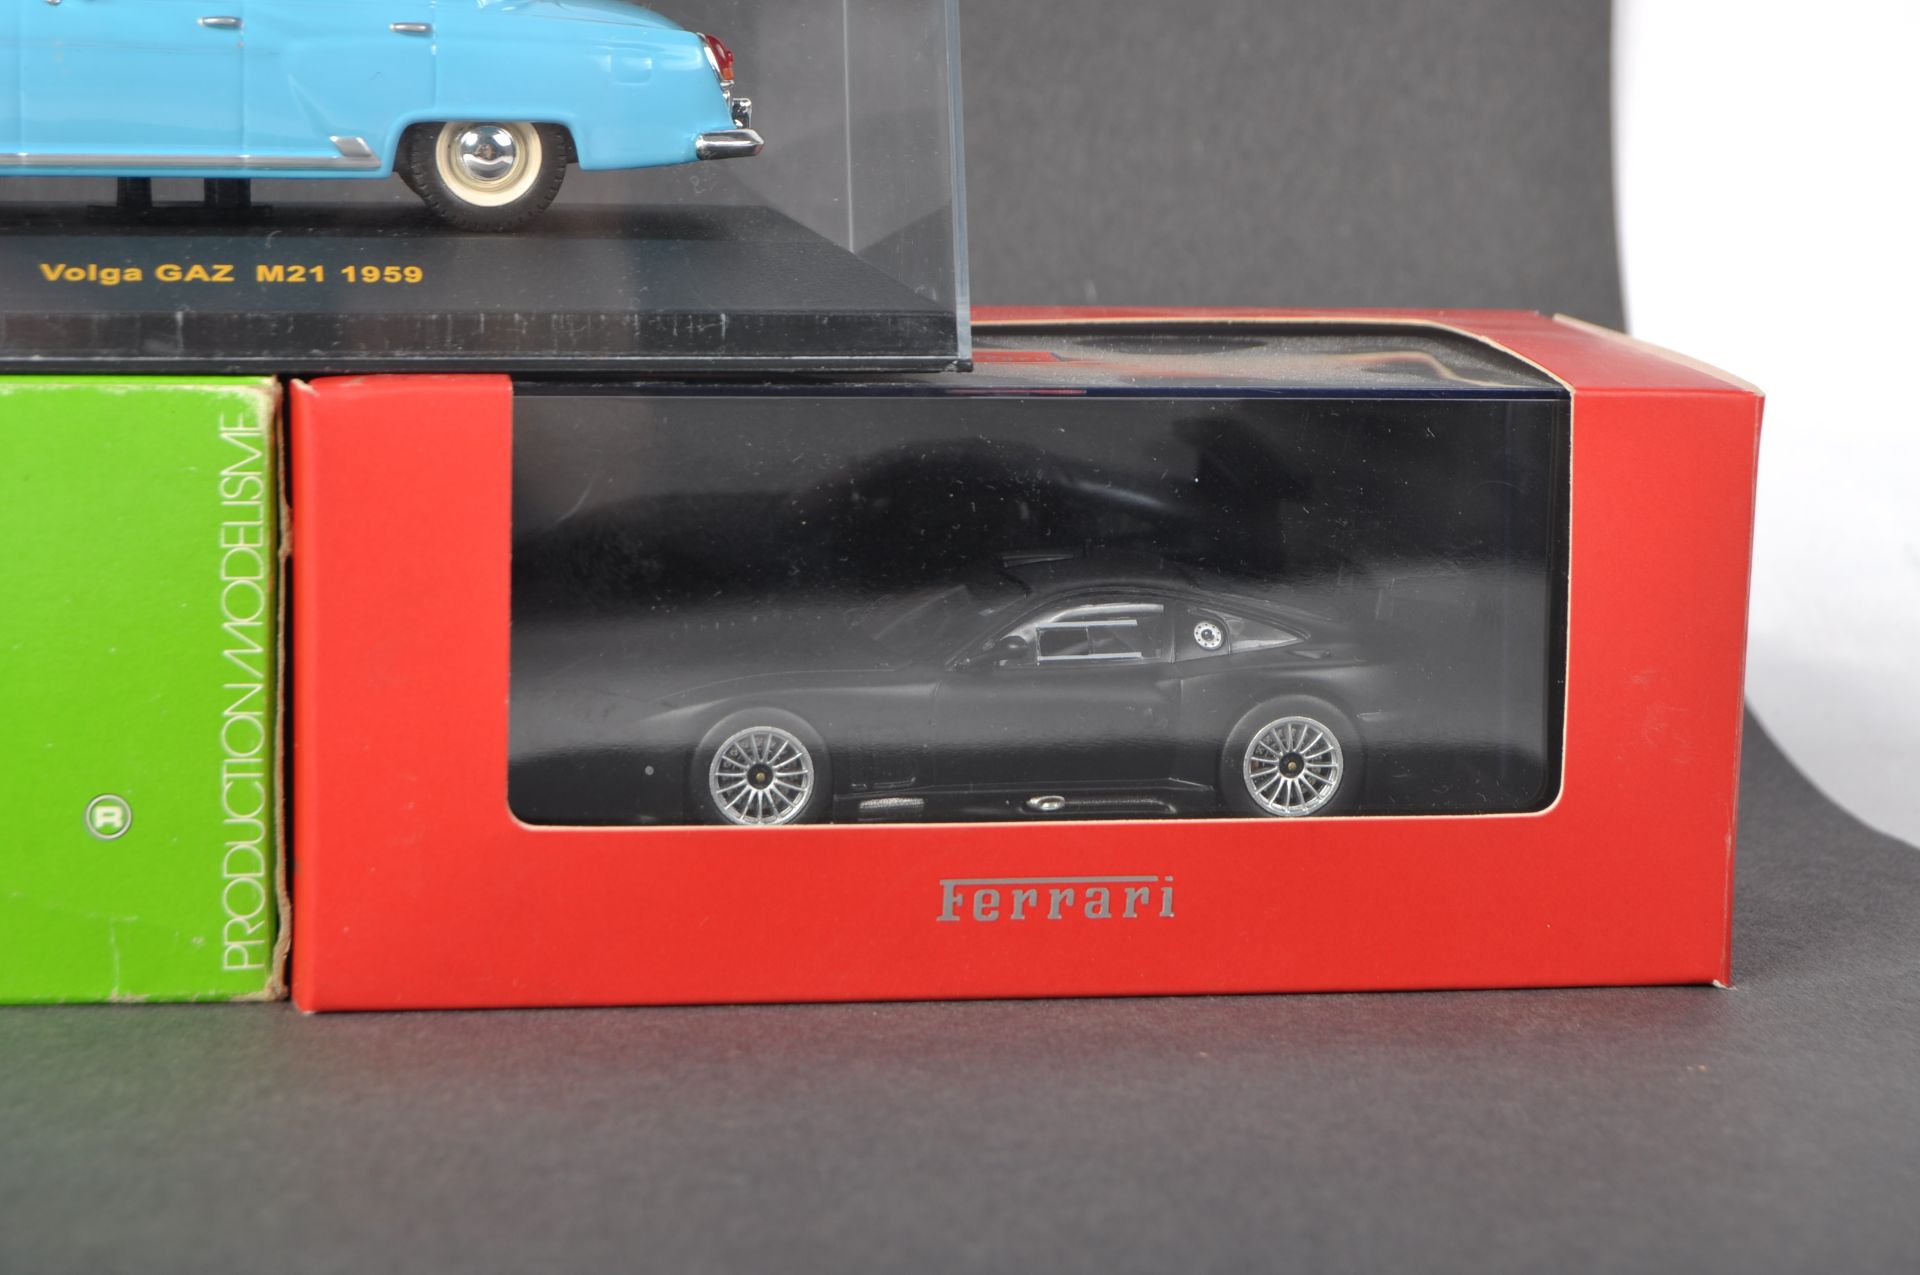 COLLECTION OF ASSORTED 1/43 SCALE DIECAST MODEL CARS - Image 3 of 4